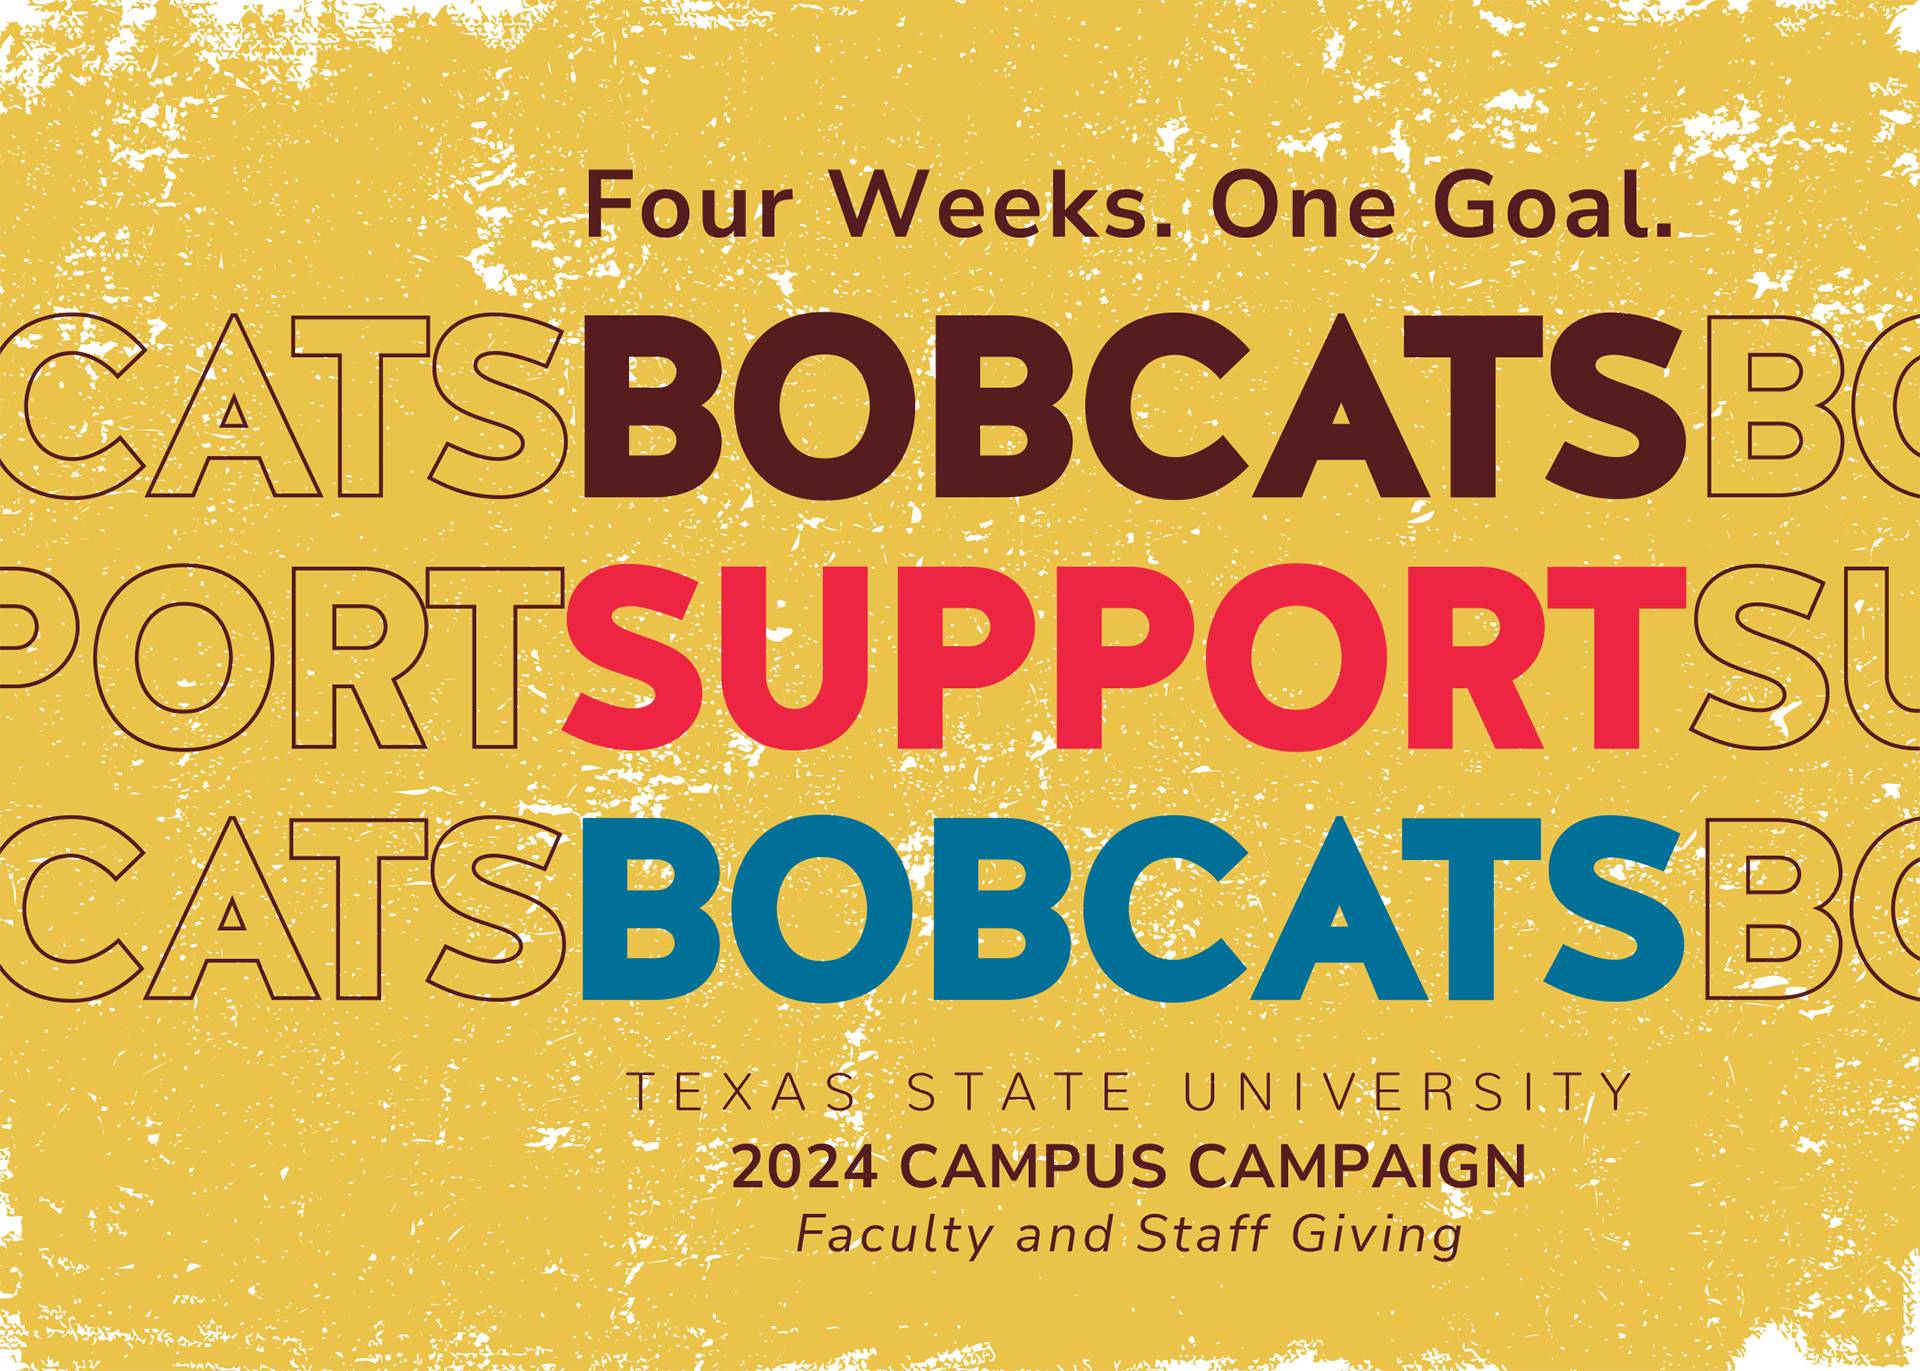 Gold color postcard with text reading "four weeks, one goal, bobcats support bobcats, 2024 campus campaign, faculty and staff giving"